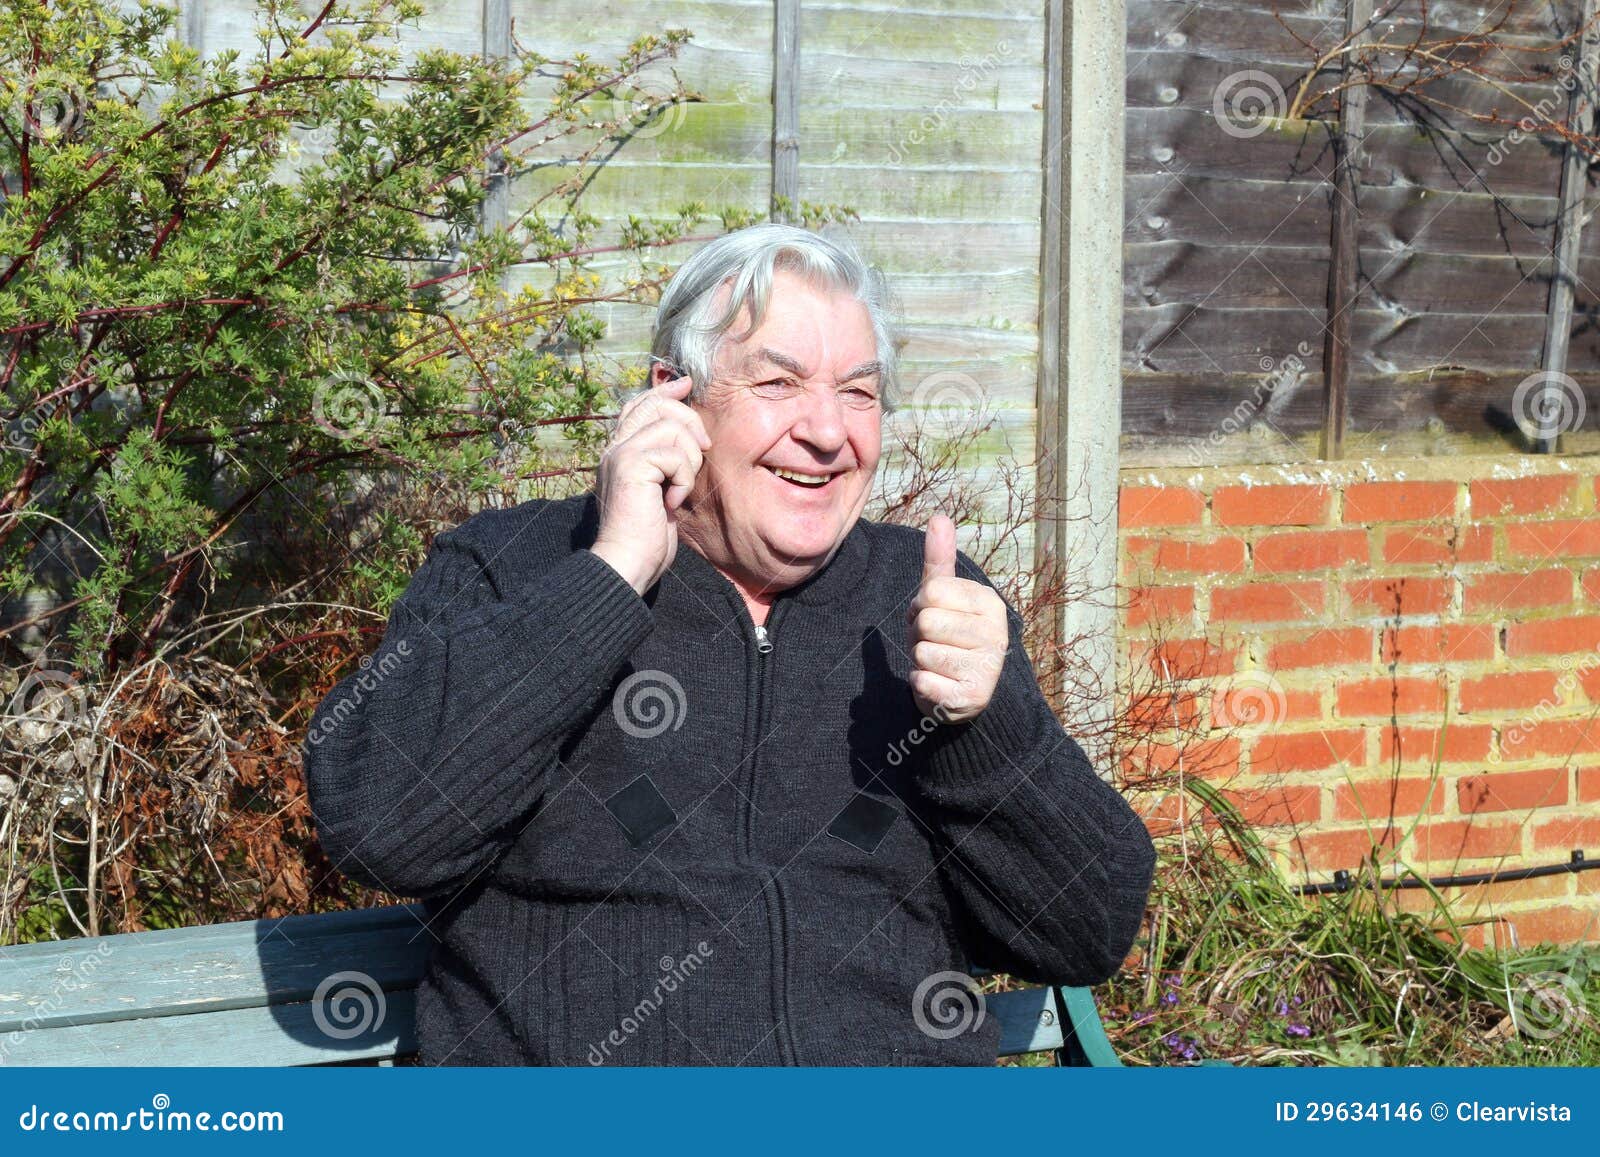 man pleased with his mobile phone converstation .